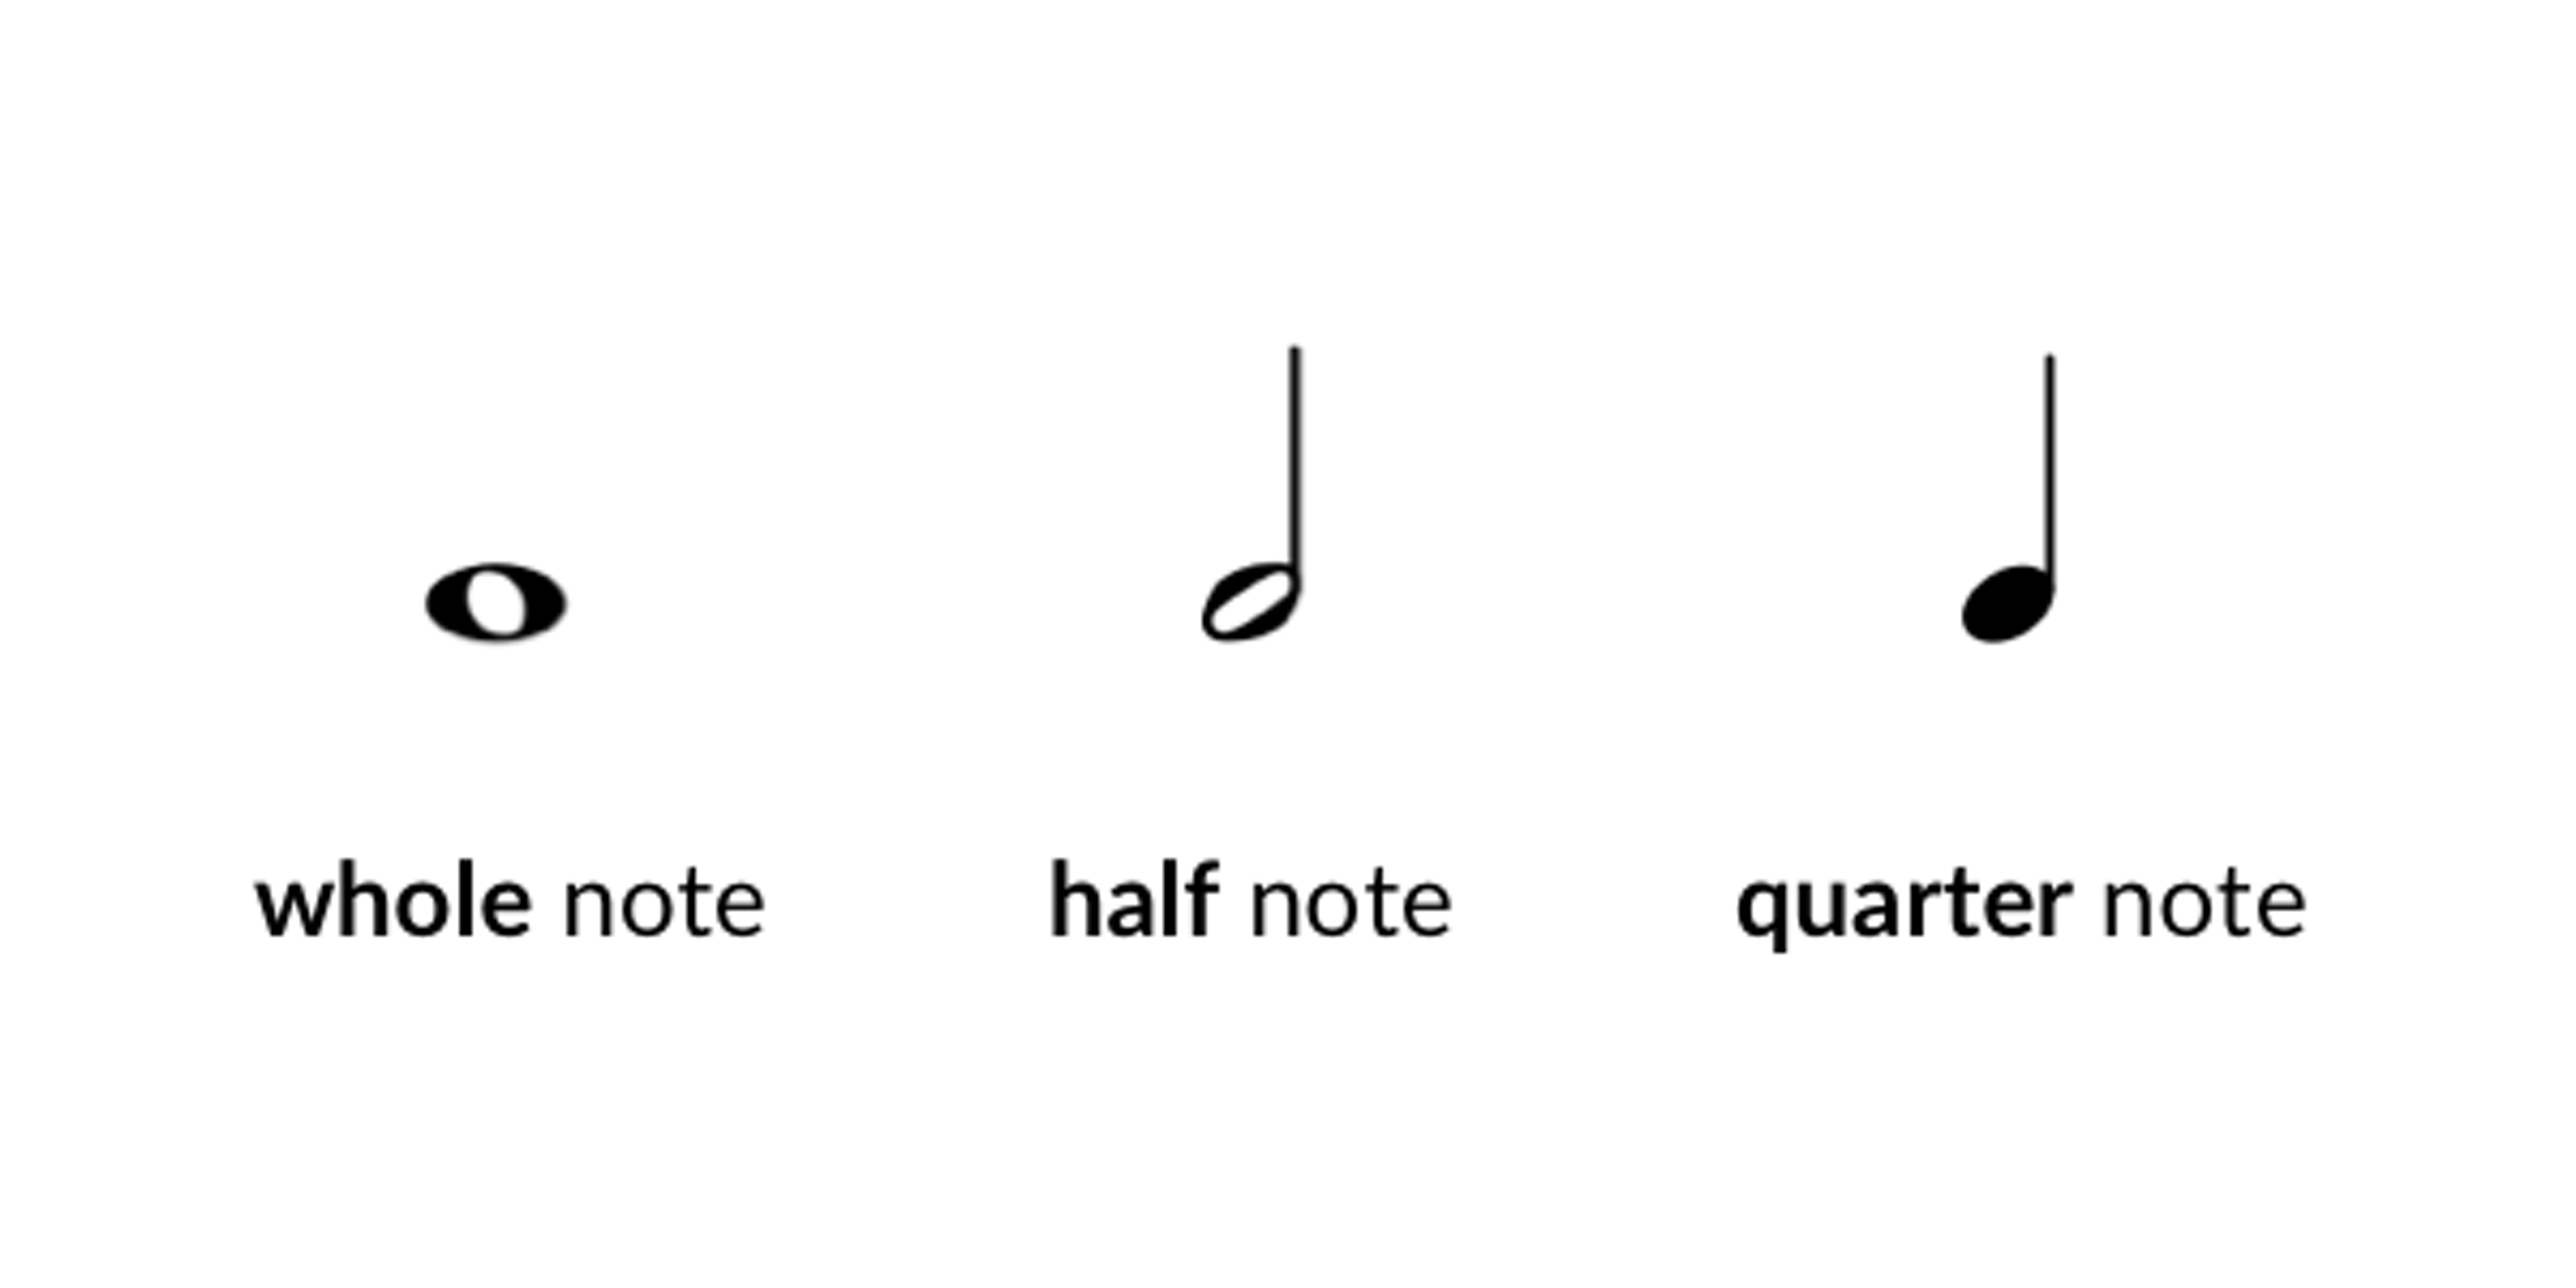 Whole, half, and quarter notes